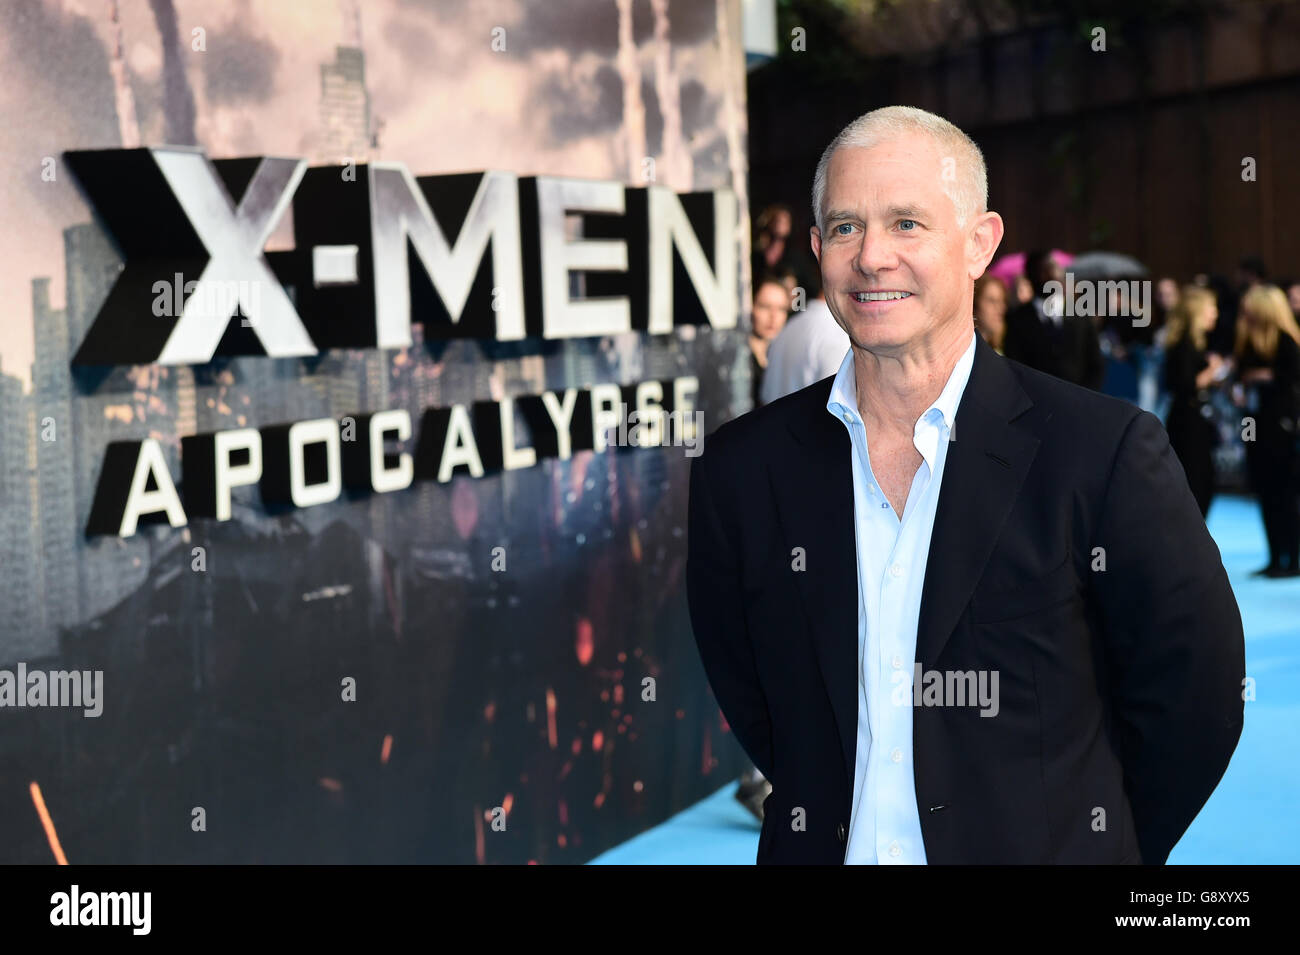 Producer Hutch Parker attending the X Men: Apocalypse Global Fan Screening at the London's BFI IMAX, London. PRESS ASSOCIATION Photo. Picture date: Monday 9th May 2016. See PA Story SHOWBIZ XMen. Photo credit should read: Ian West/PA Wire Stock Photo